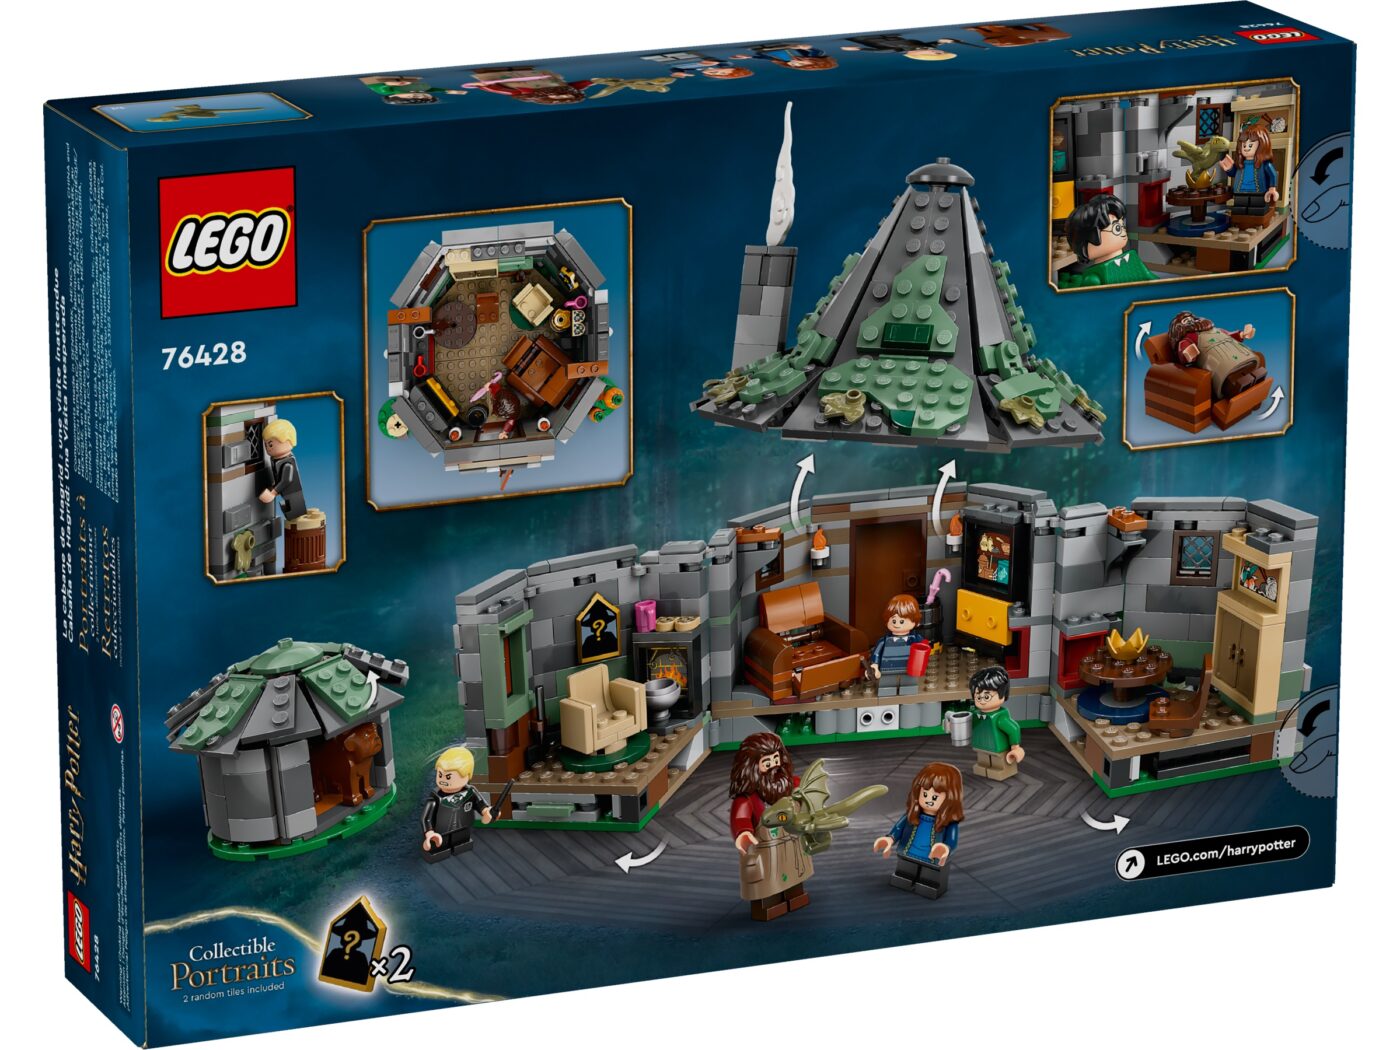 A New Lego Harry Potter game is coming - Boing Boing